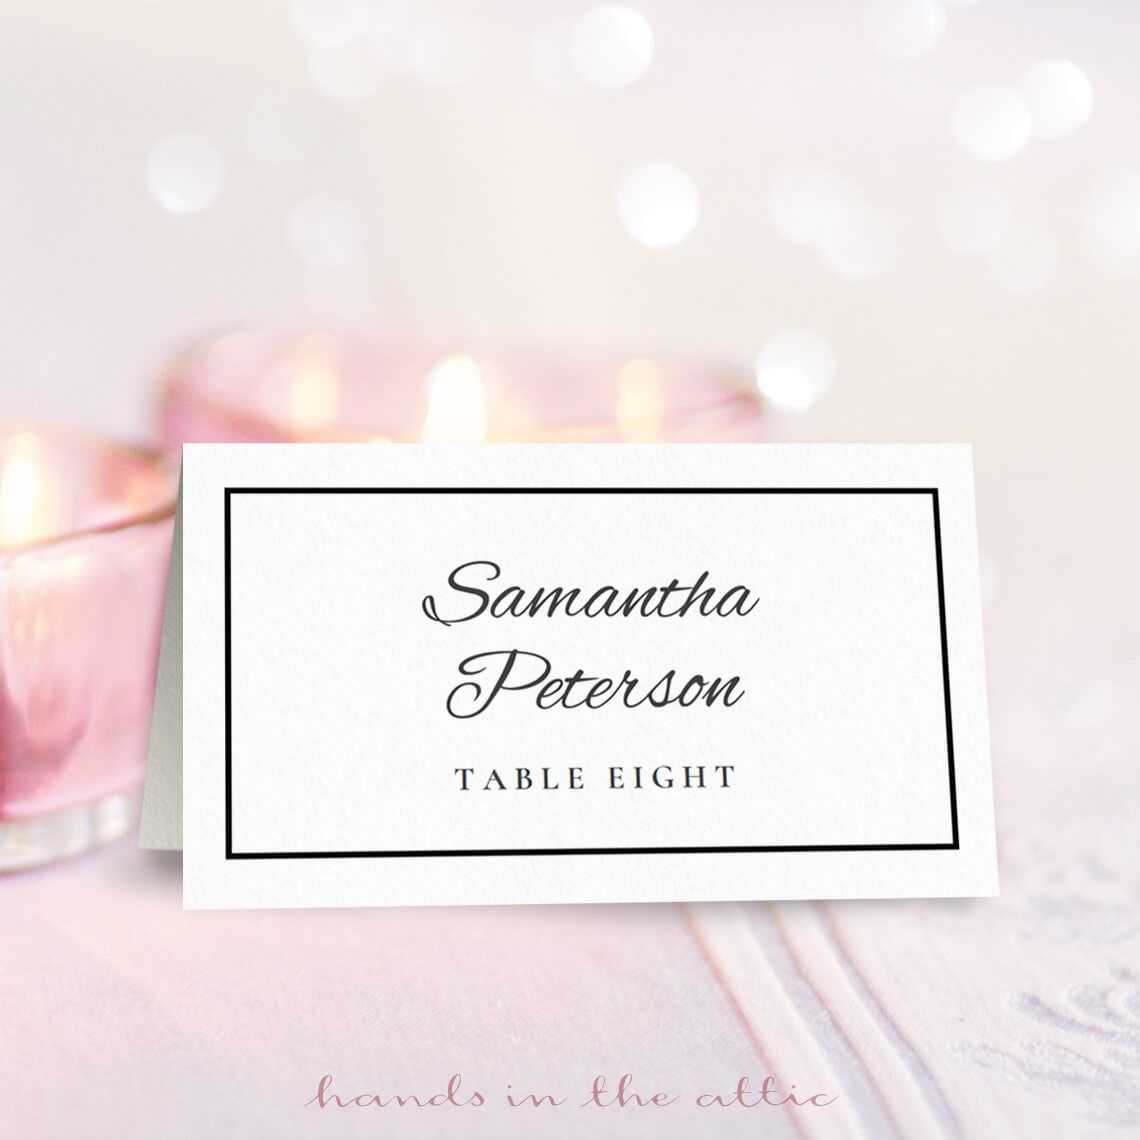 020 Printable Place Cards Template Ideas Placement Card Inside Christmas Table Place Cards Template